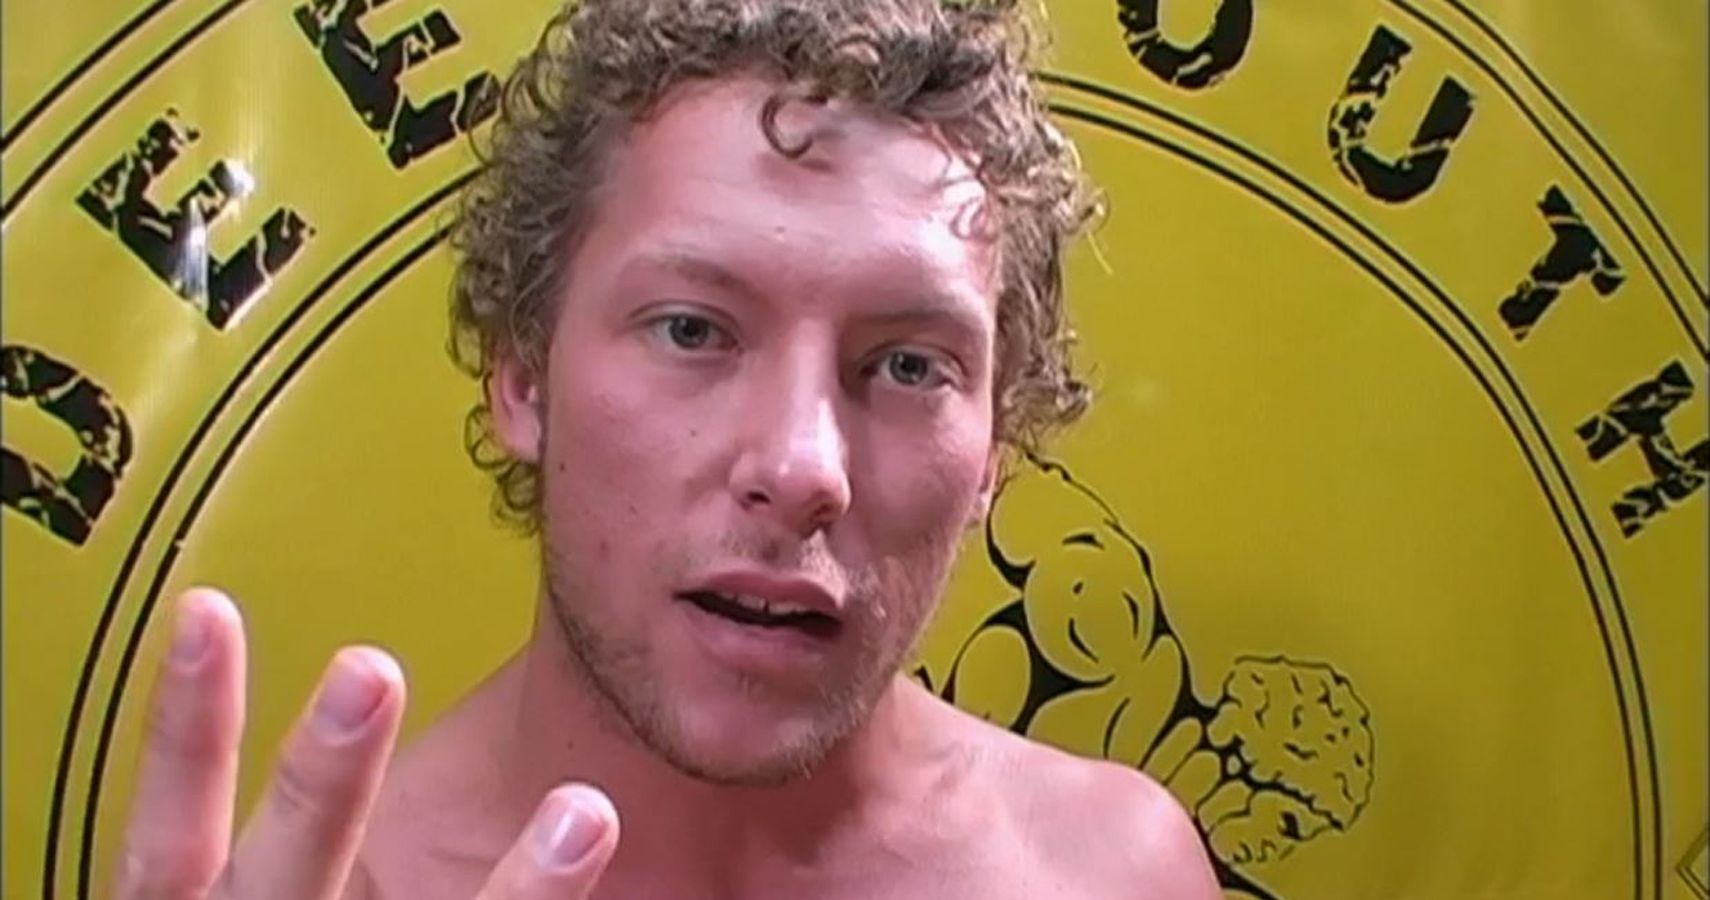 10 Facts You Didn't Know About Kenny Omega